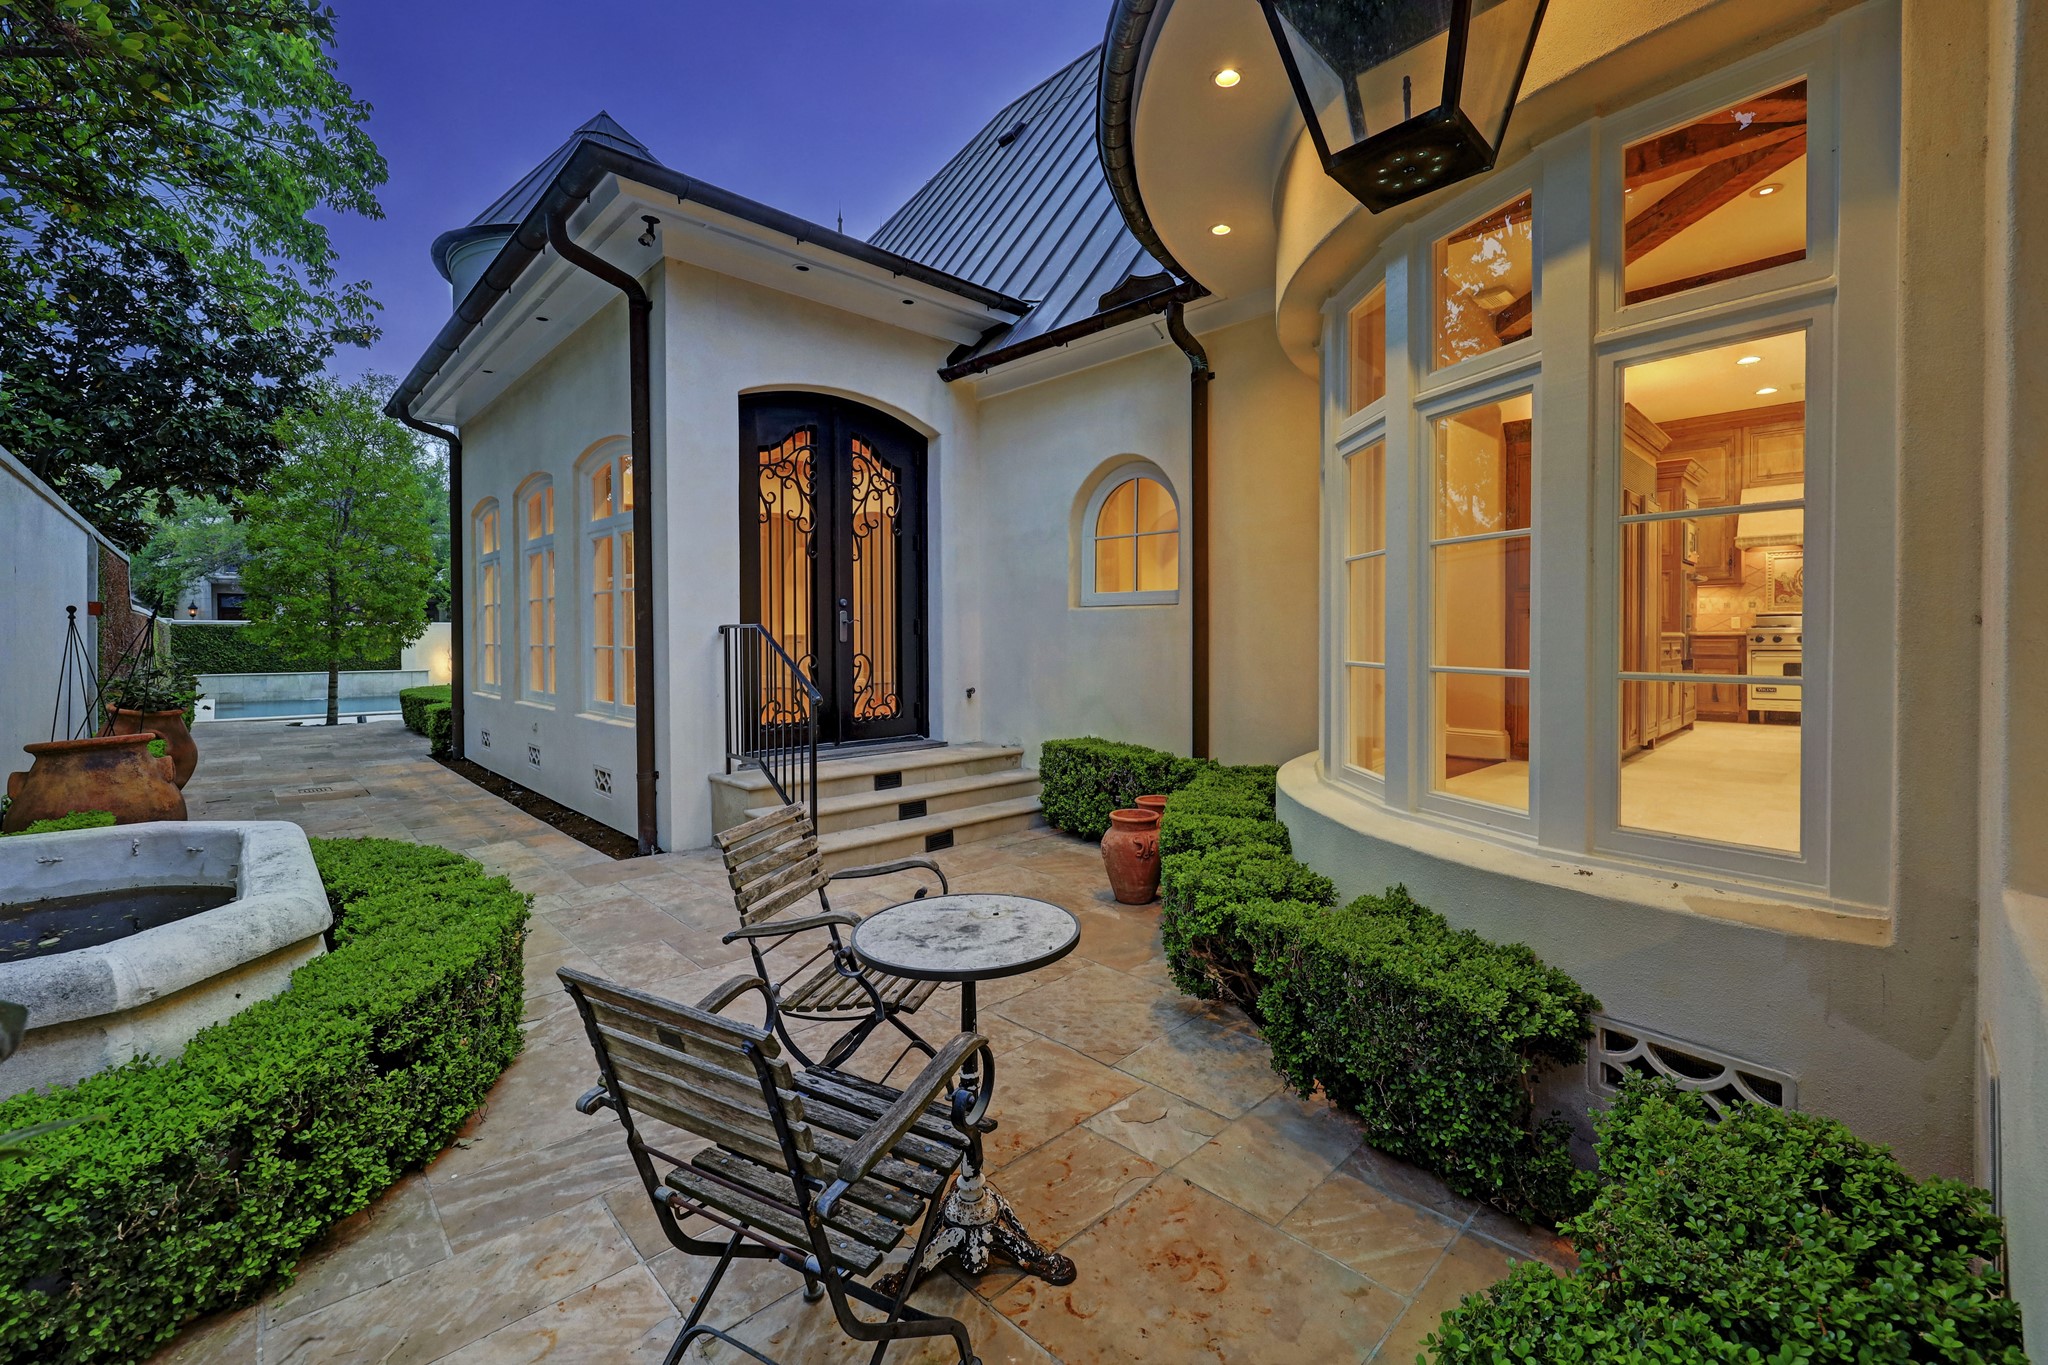 This charming patio is accessed from the Dining Room, the Breakfast Room or even by waking around from the front patio with the swimming pool and the fire pit.